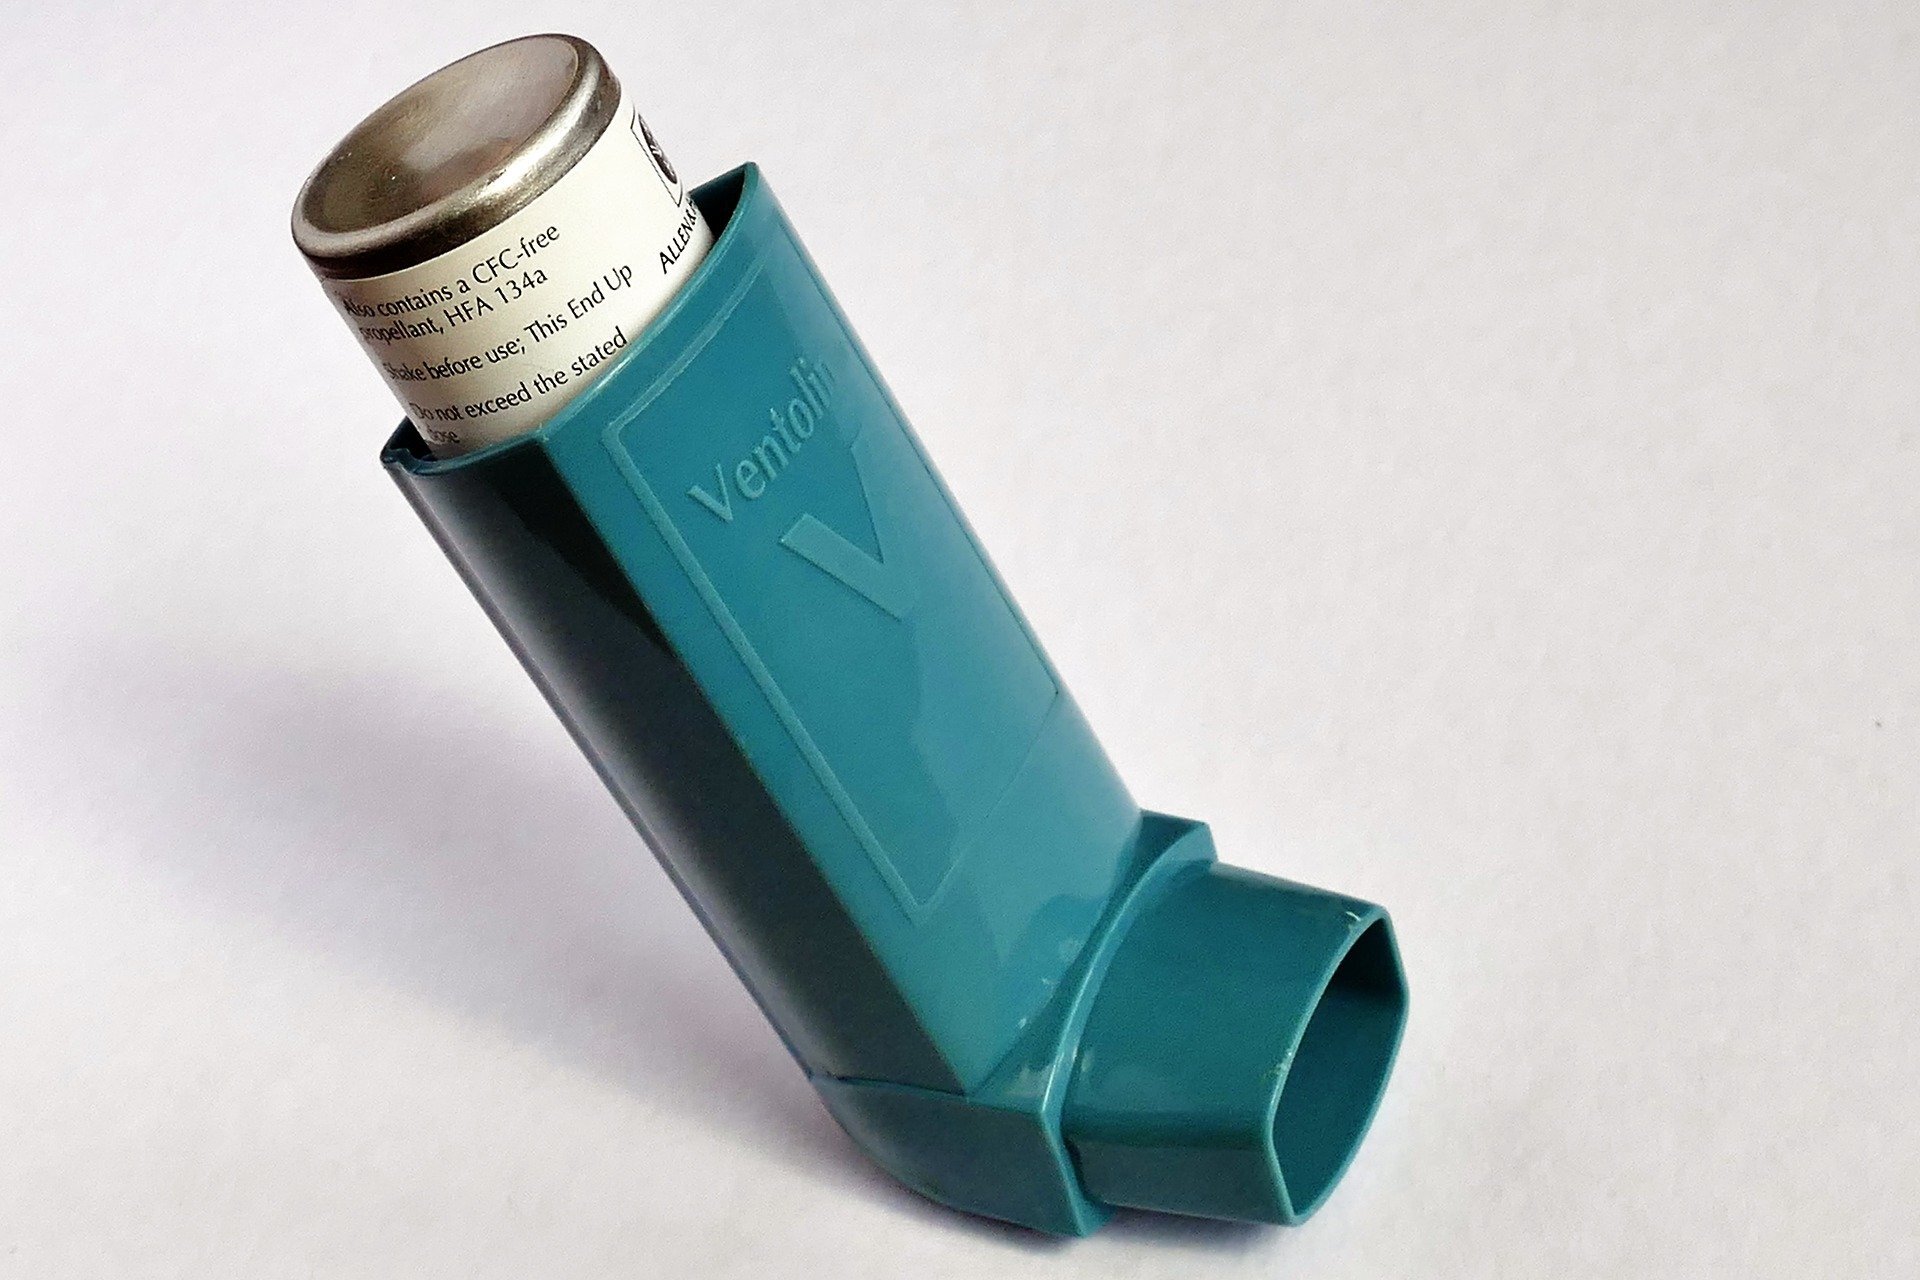 #Asthma medication not working? Try another